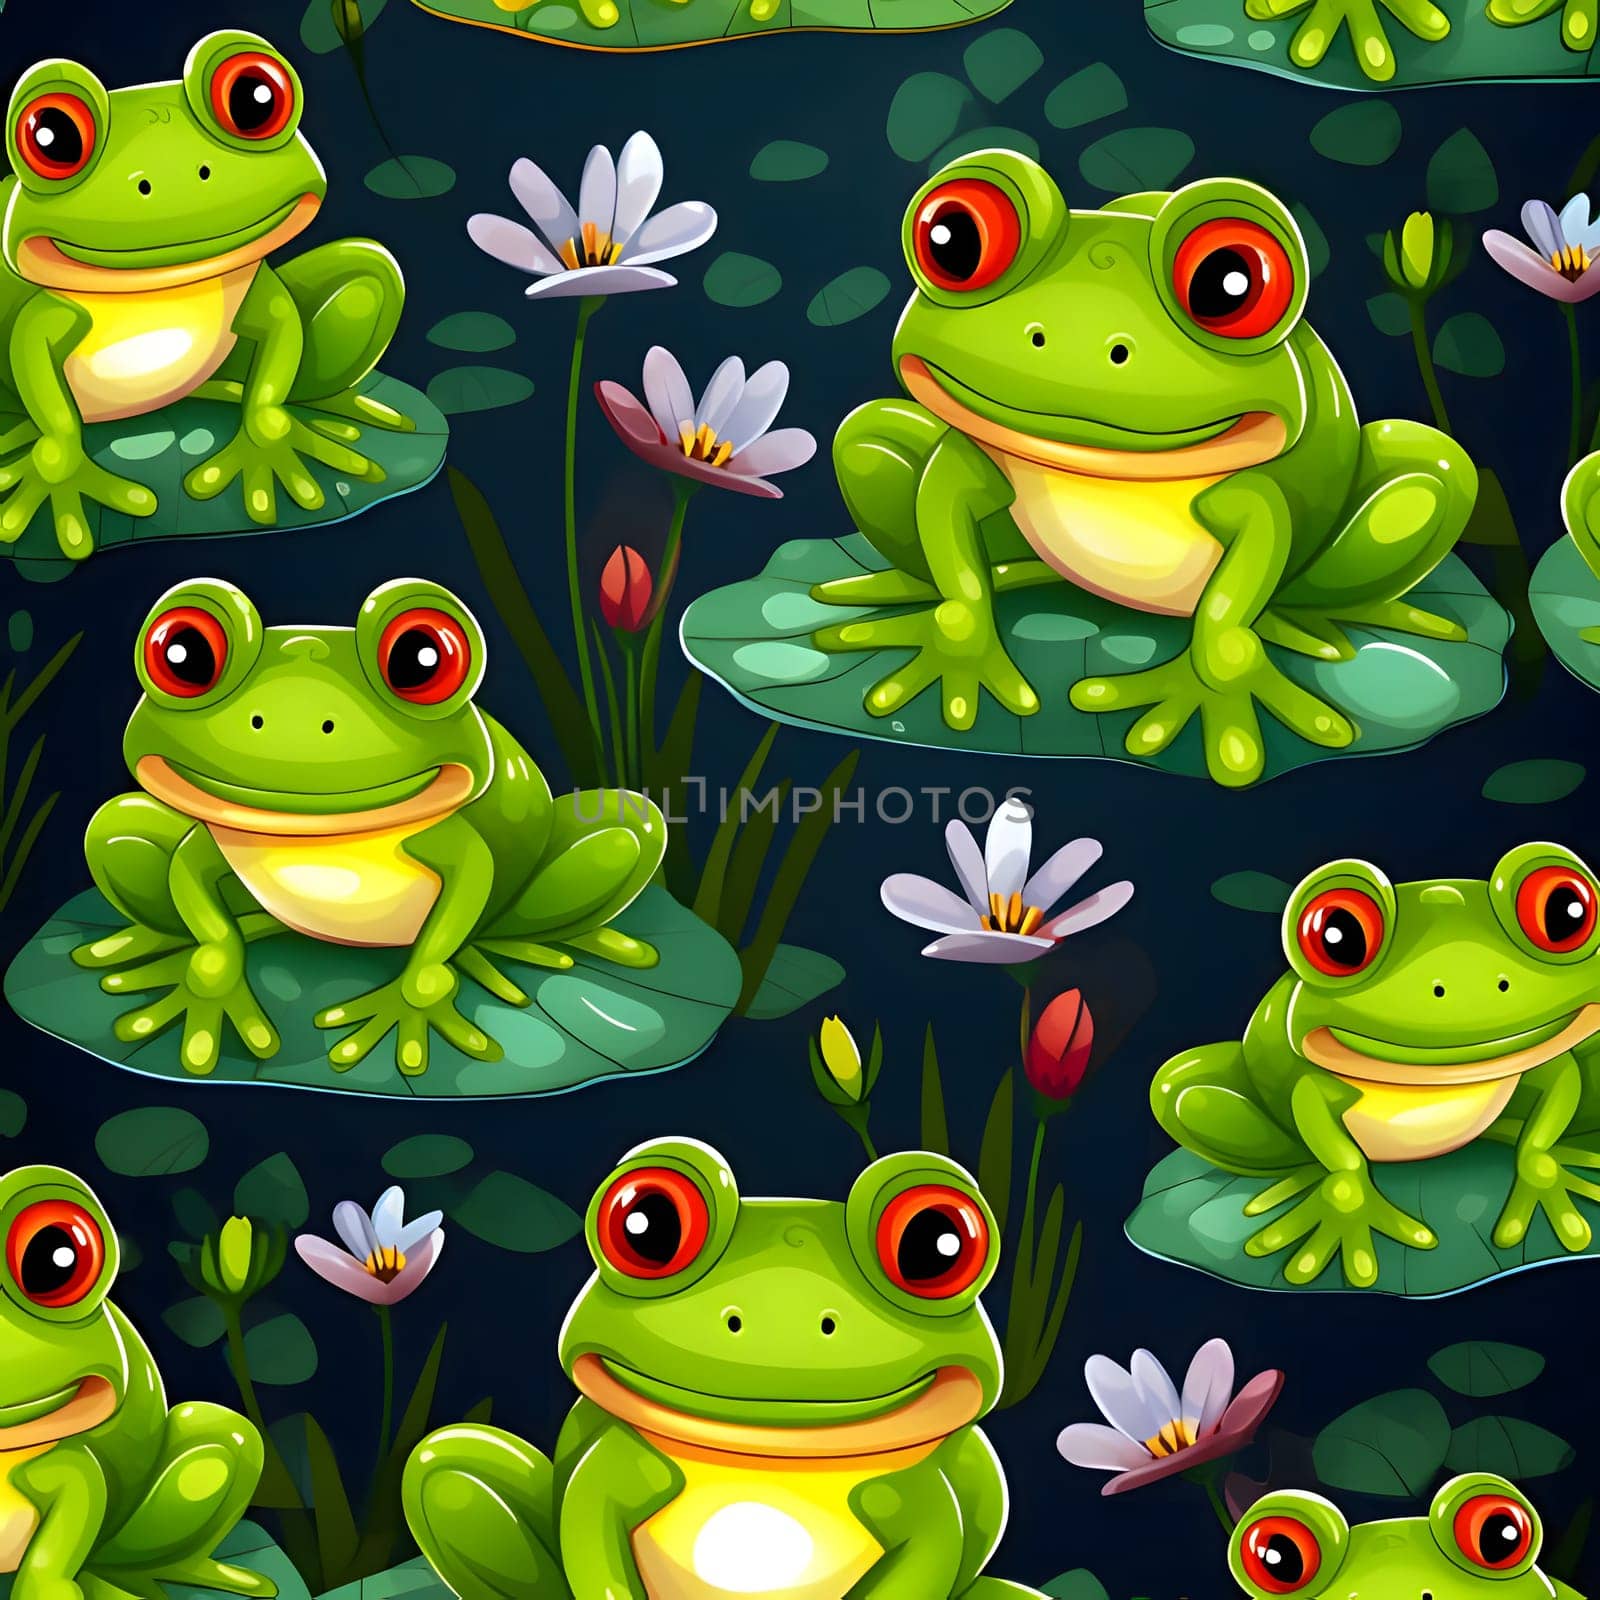 Patterns and banners backgrounds: Seamless pattern with frogs and water lilies on dark background